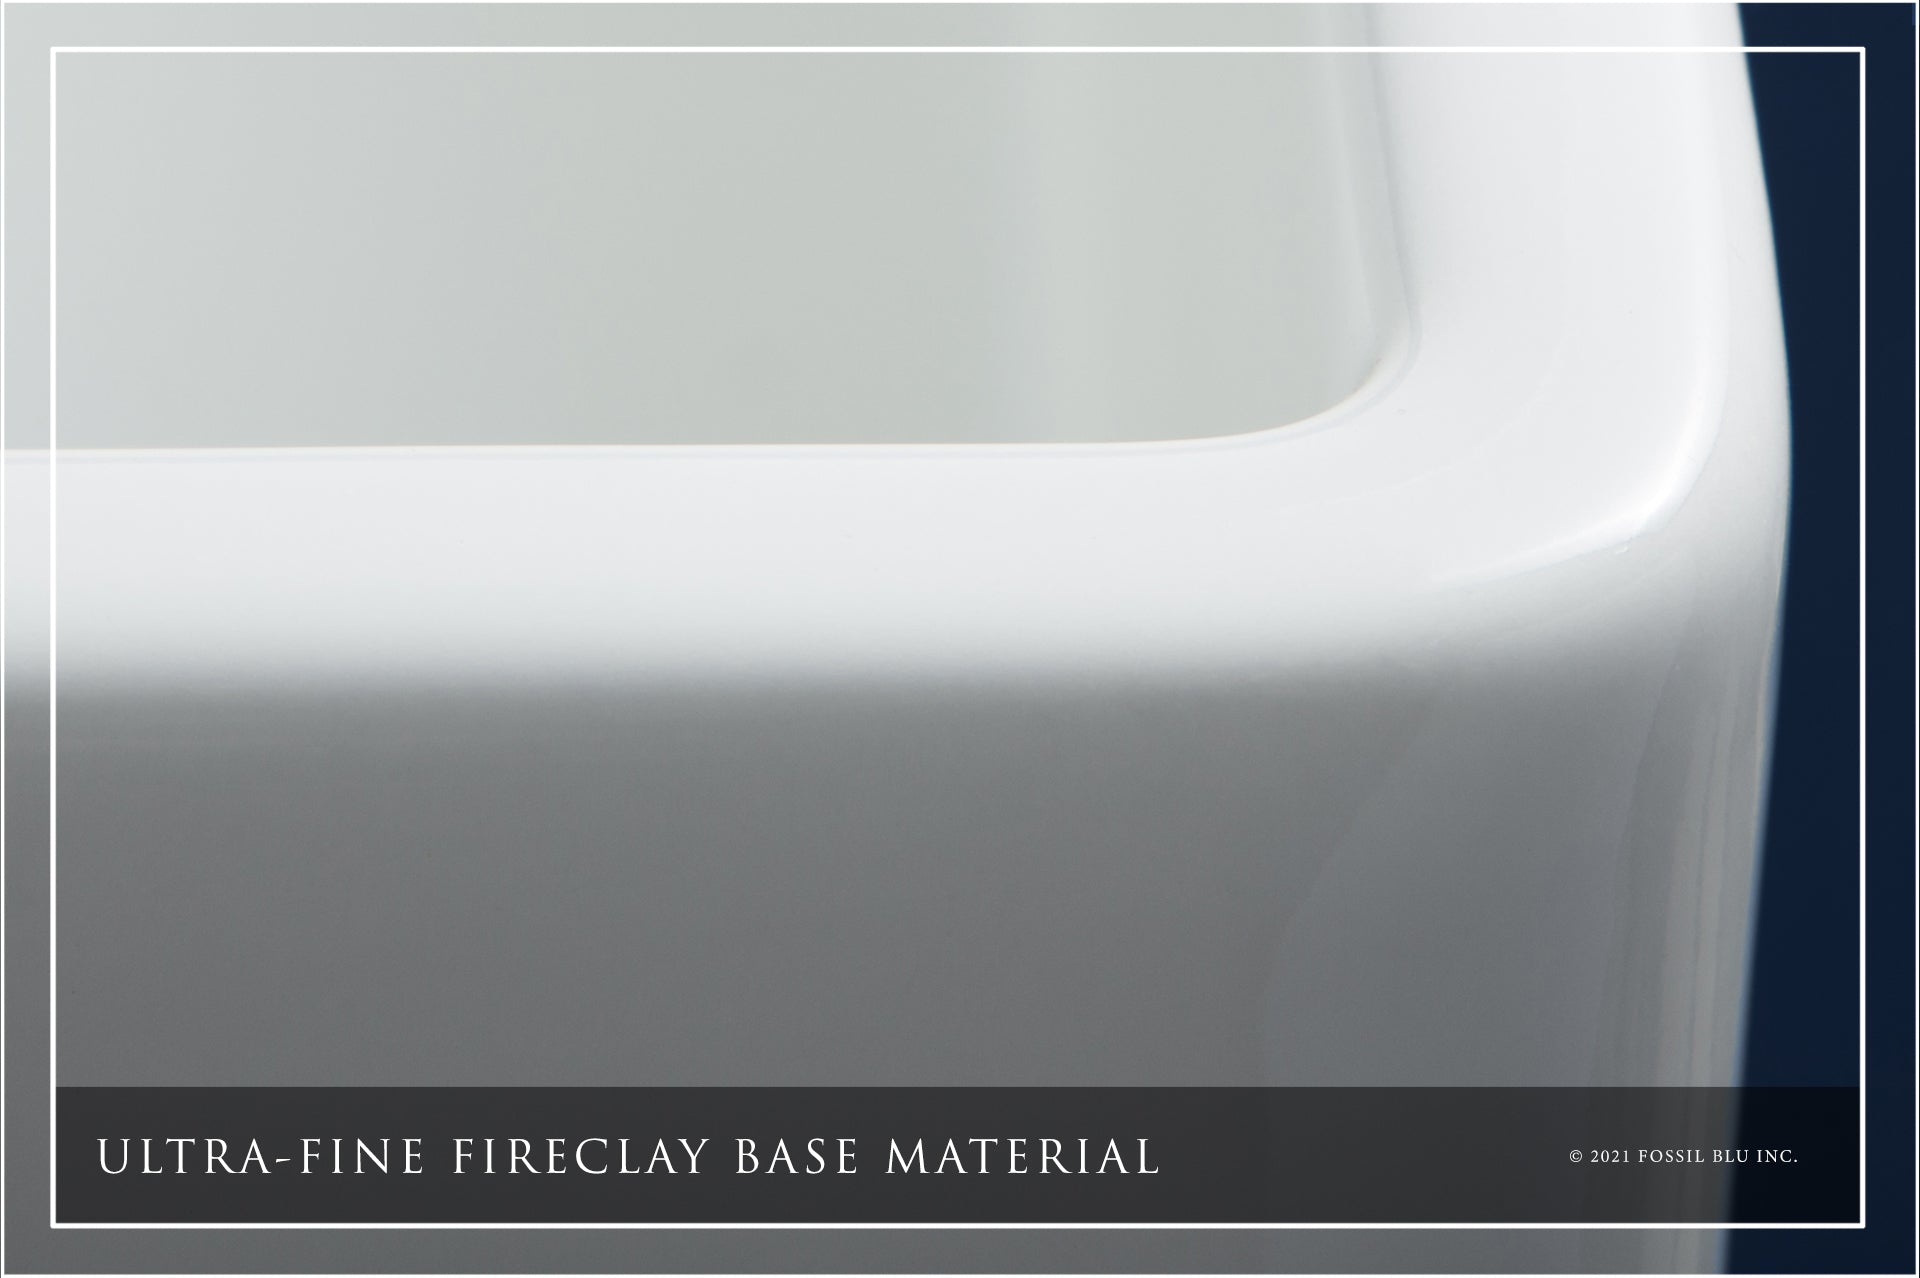 FSW1002PN LUXURY 33-INCH SOLID FIRECLAY FARMHOUSE SINK IN WHITE, POLISHED NICKEL ACCS, FLAT FRONT